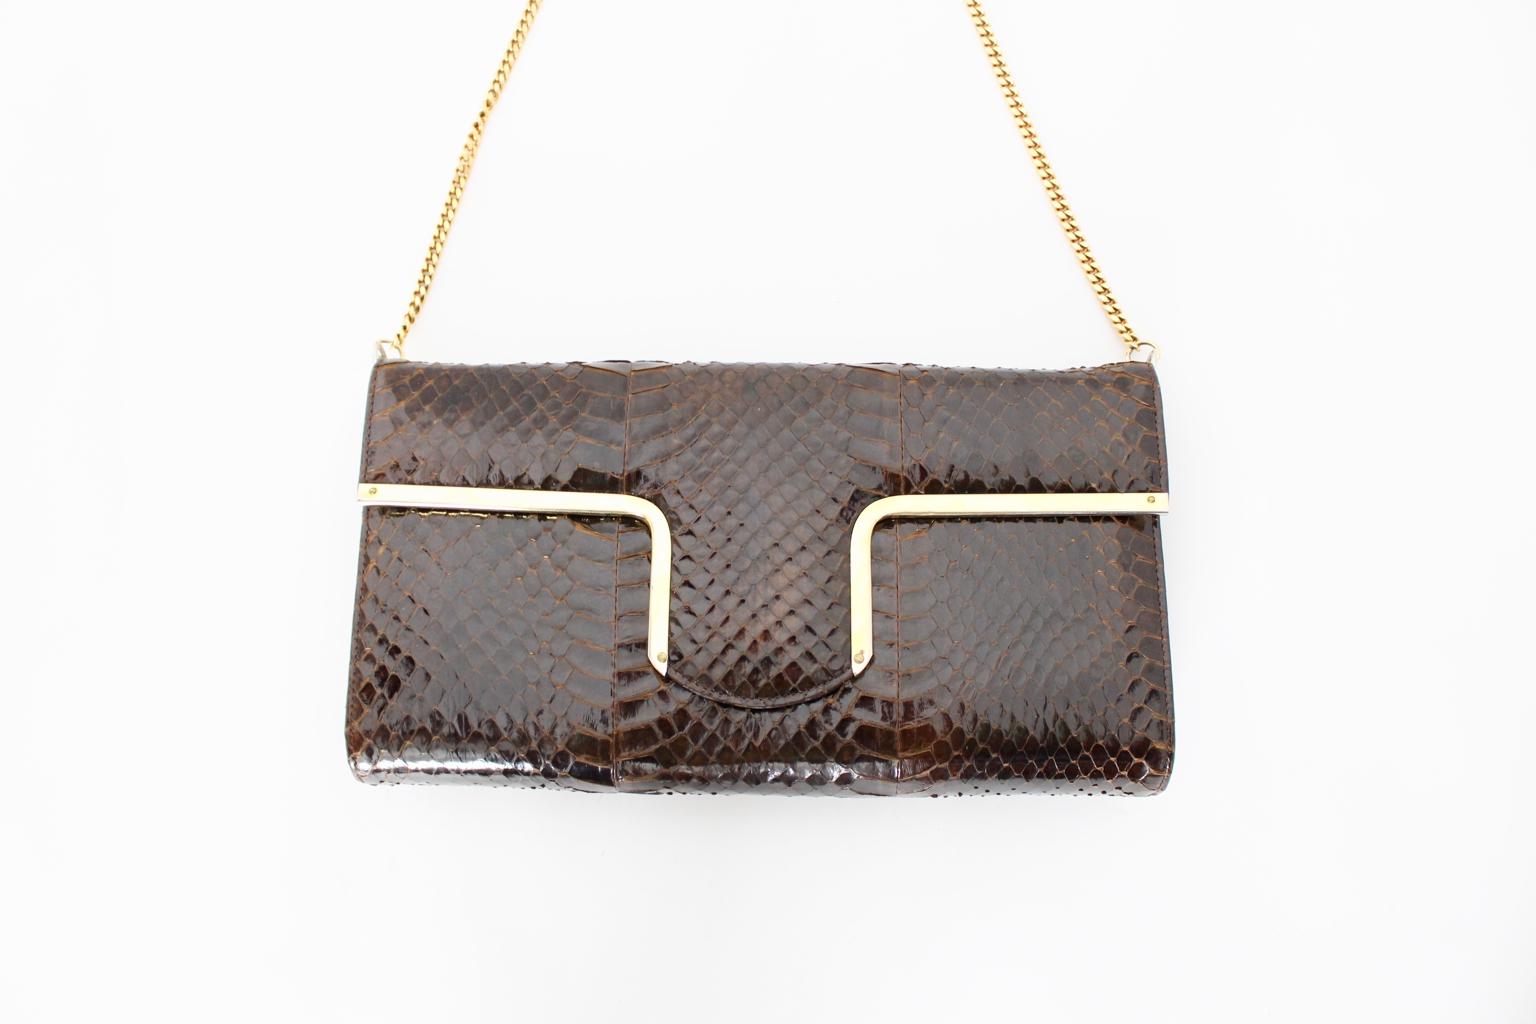 Vintage Snake Skin Clutch or Handbag Brown and Gold France 1970s In Good Condition For Sale In Vienna, AT